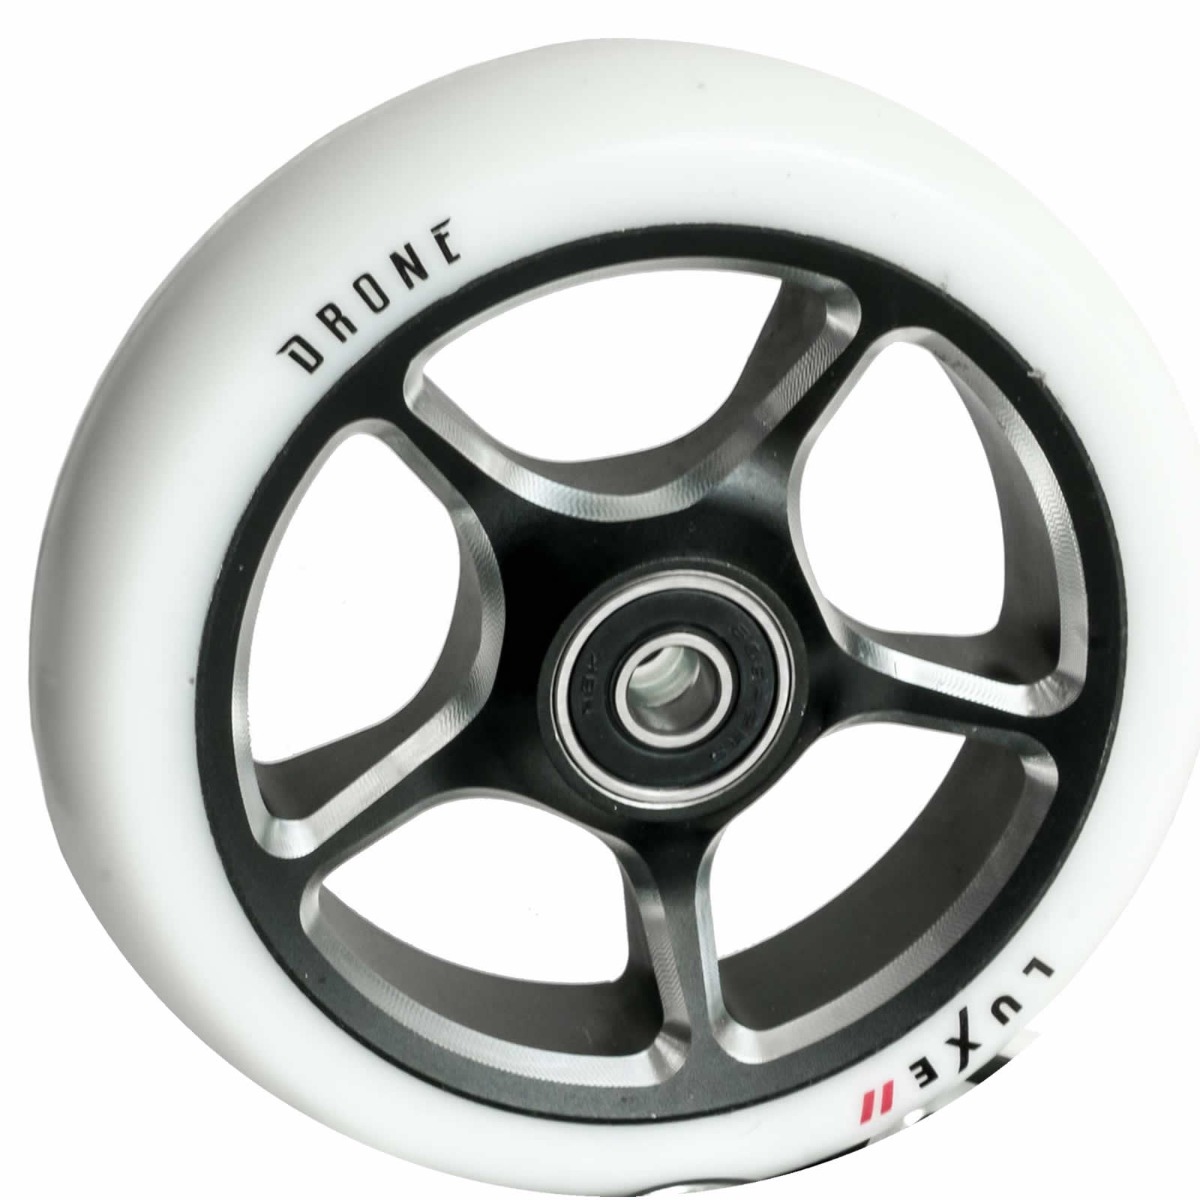 An image of Drone Luxe 2 110mm Scooter Wheel - White